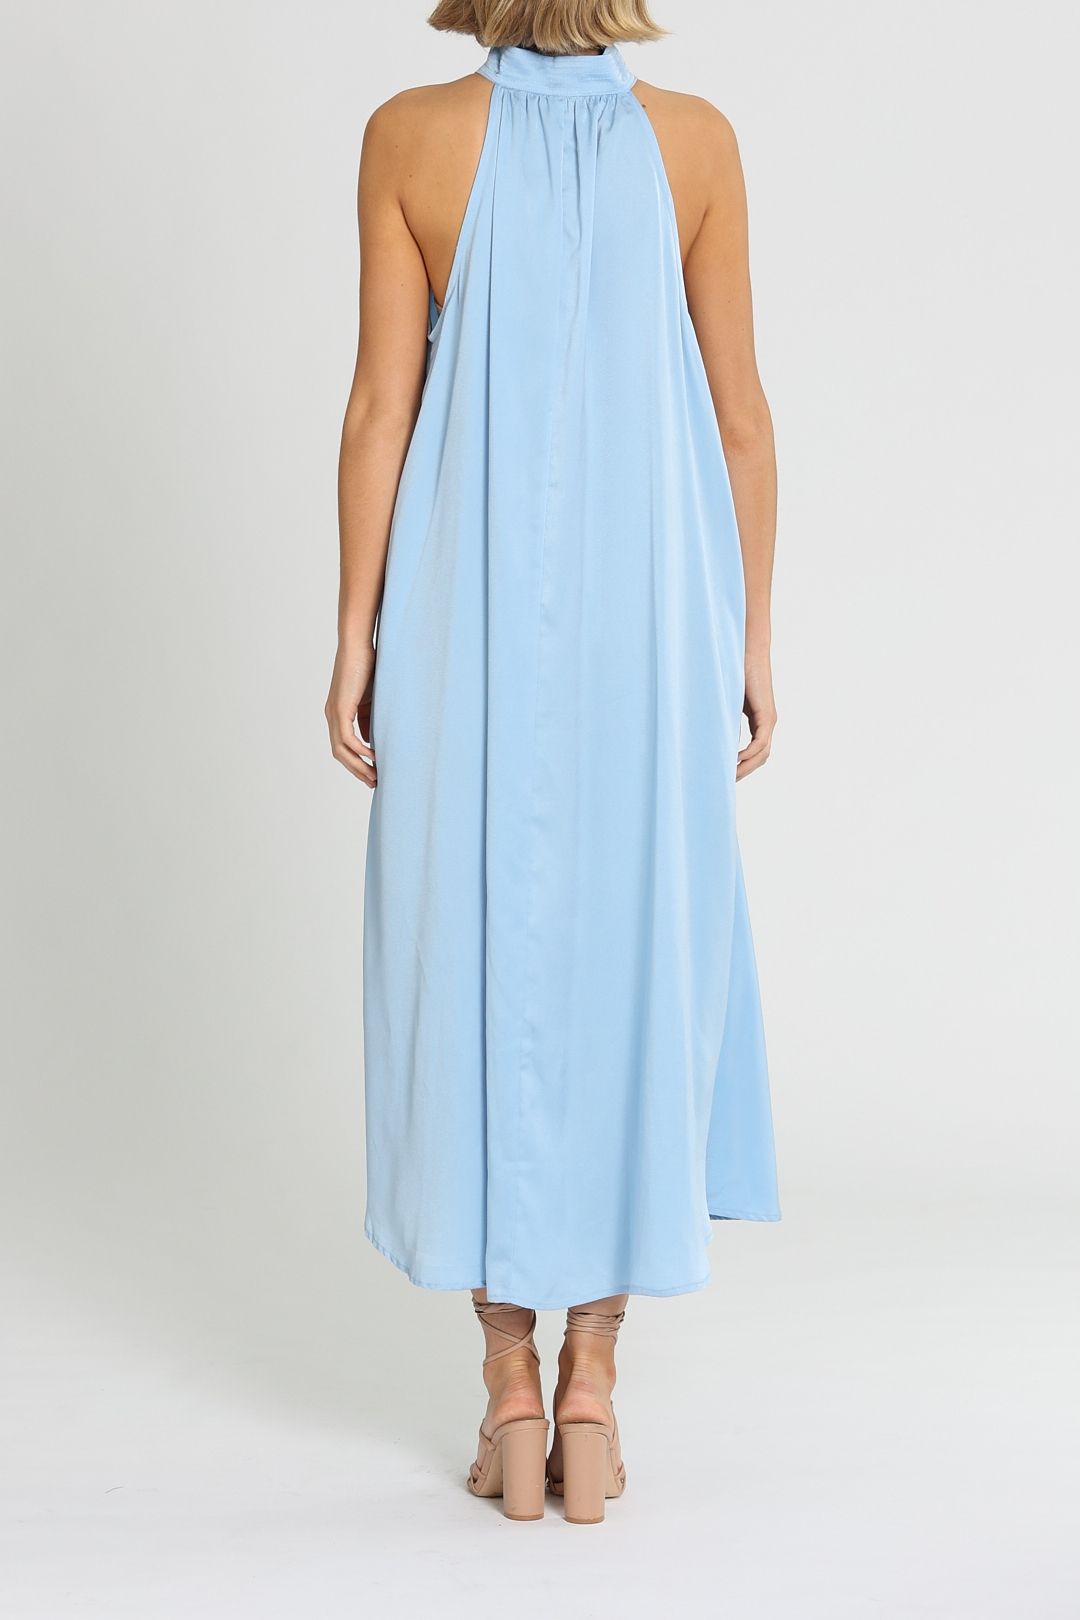 Brave And True Rendezvous High Neck Midi Dress Relaxed